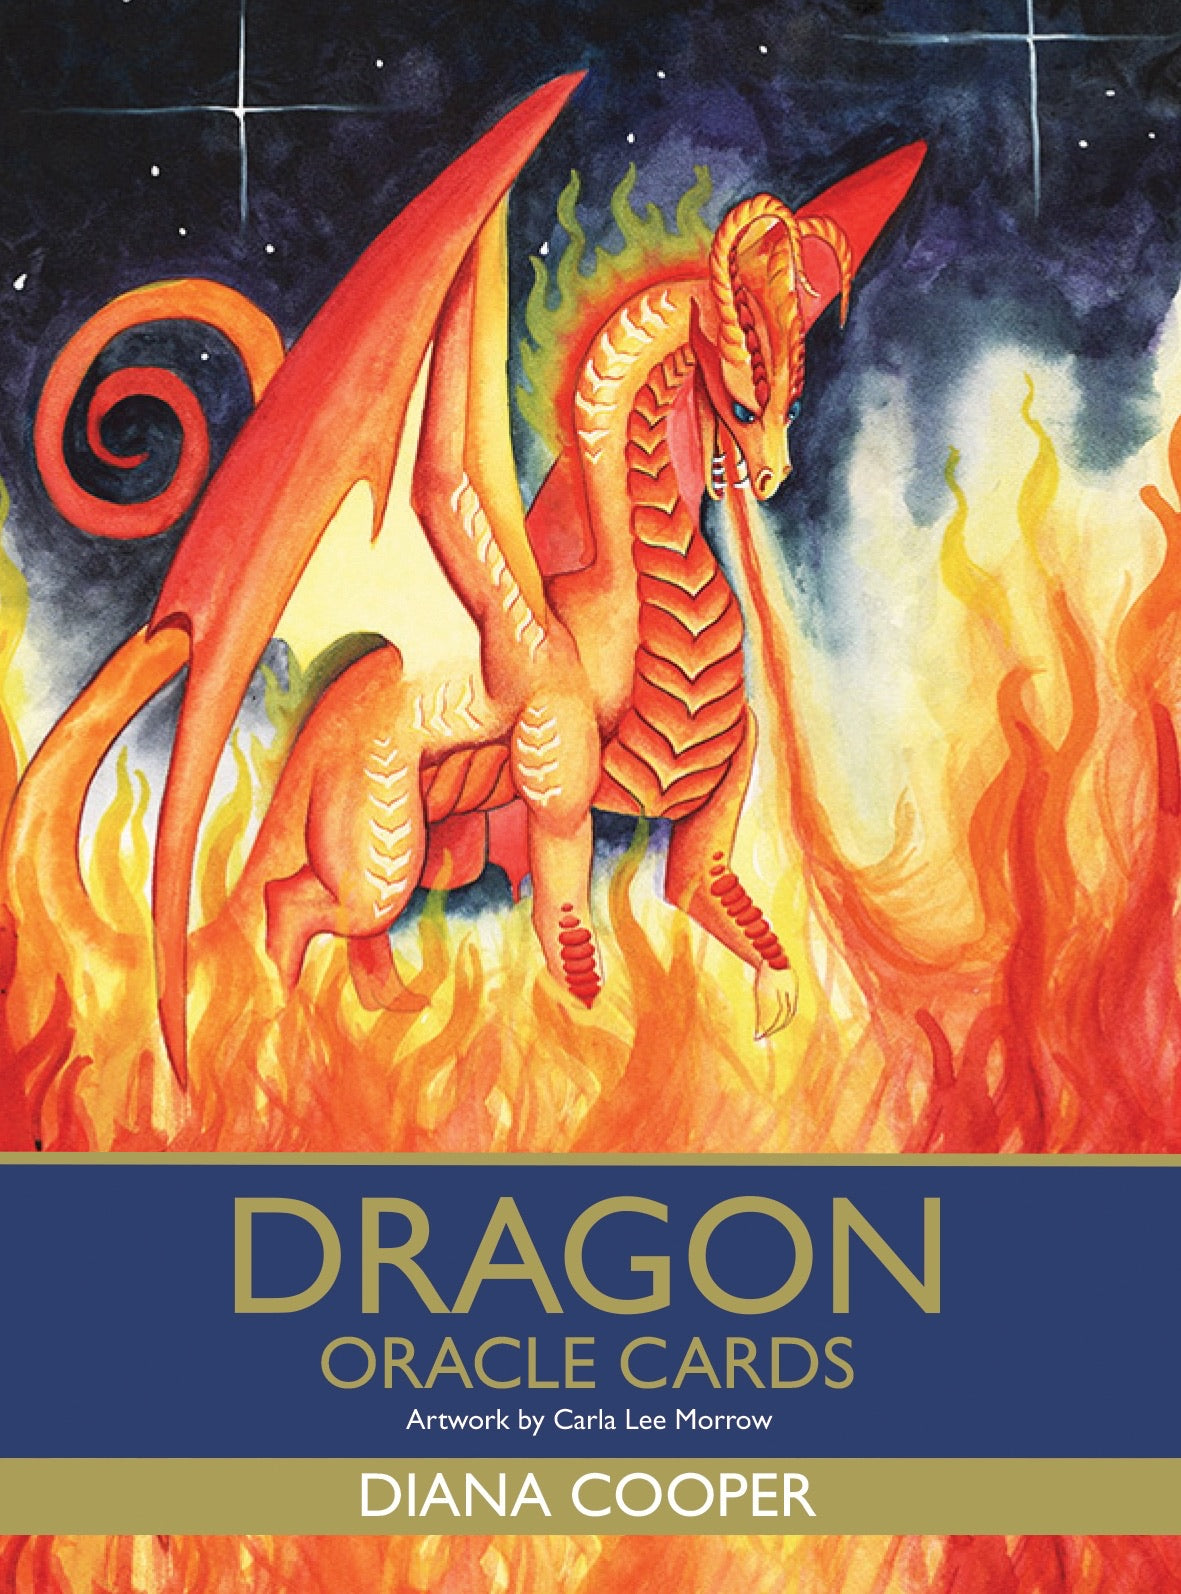 ORACLE CARDS || DRAGON ORACLE CARDS